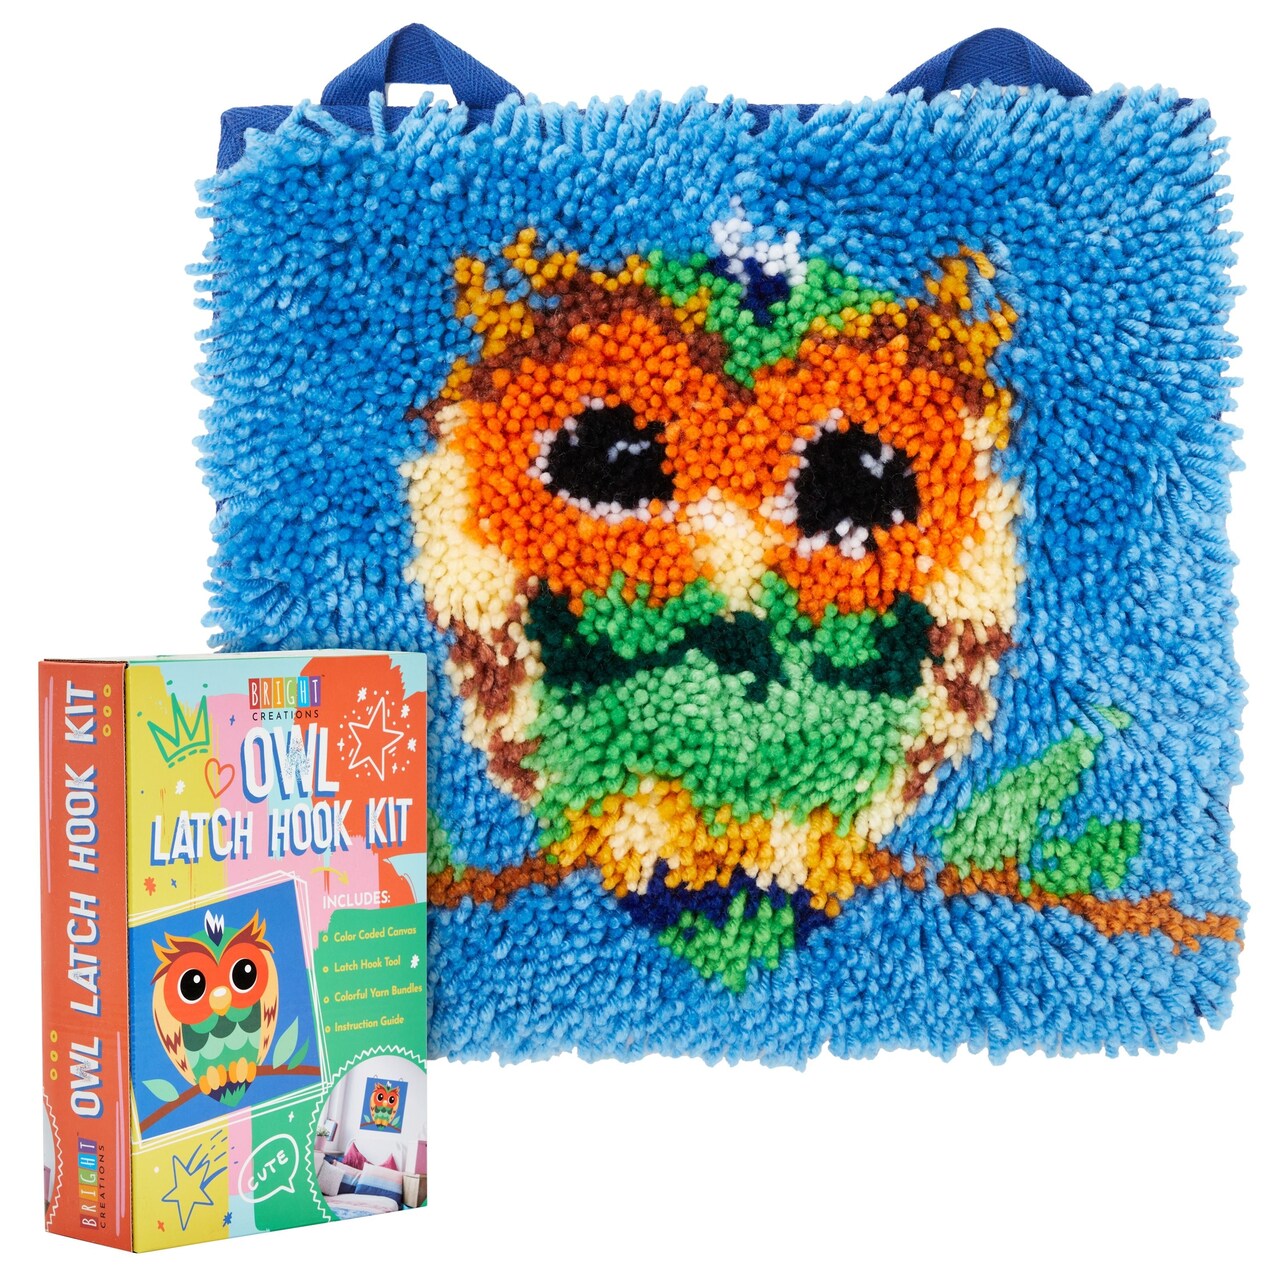 Mini Owl Latch Hook Rug Kit For Kids Crafts, Adults, and Beginners